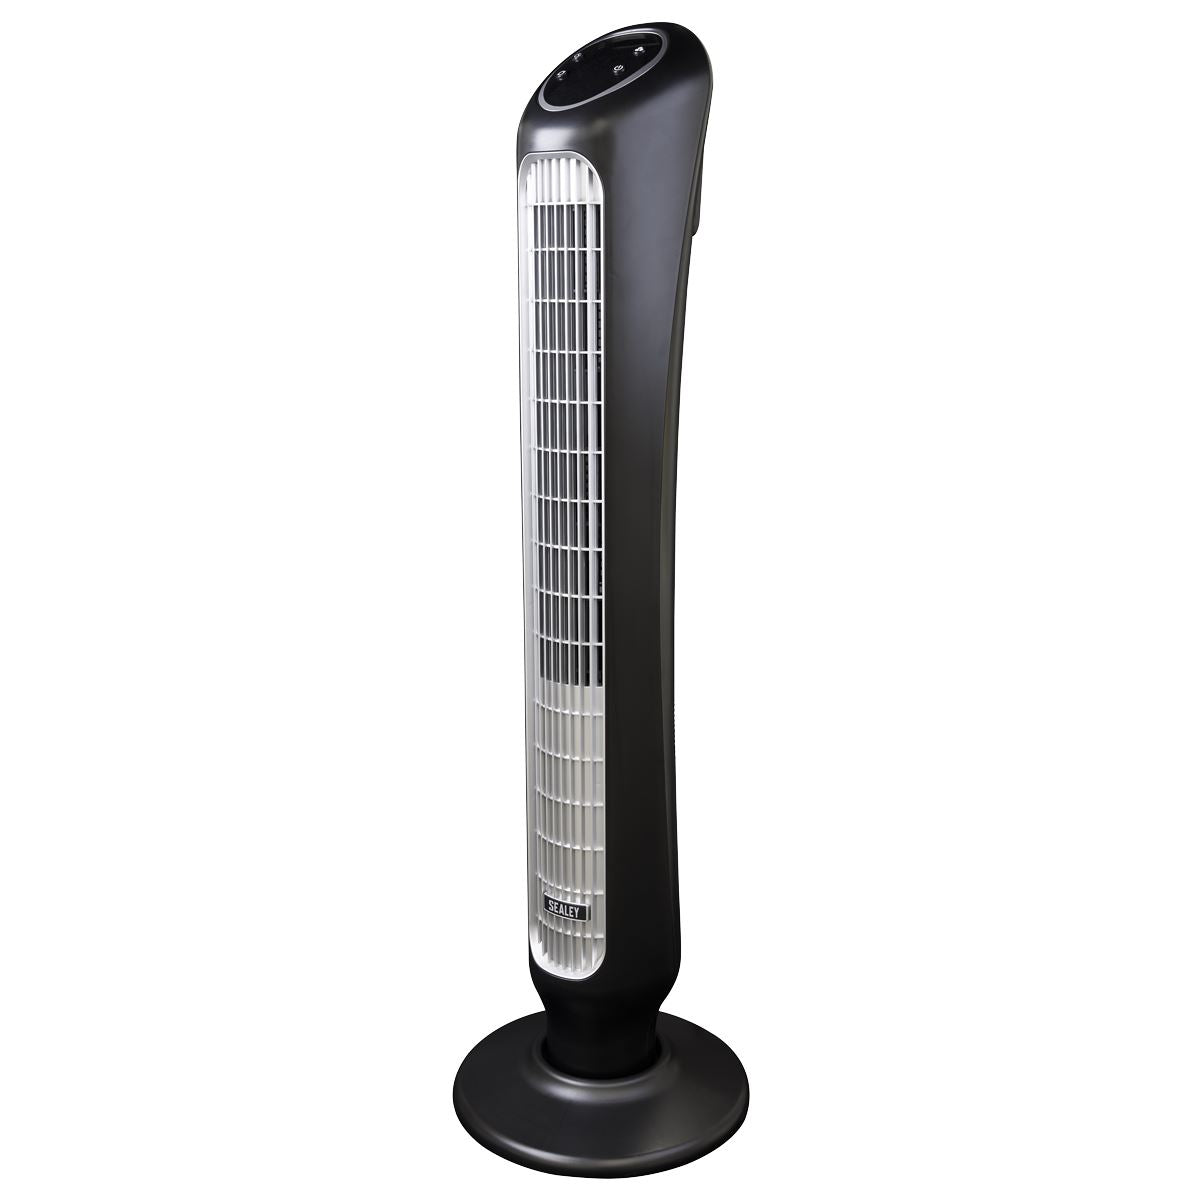 Sealey 43" Quiet High Performance Oscillating Tower Fan